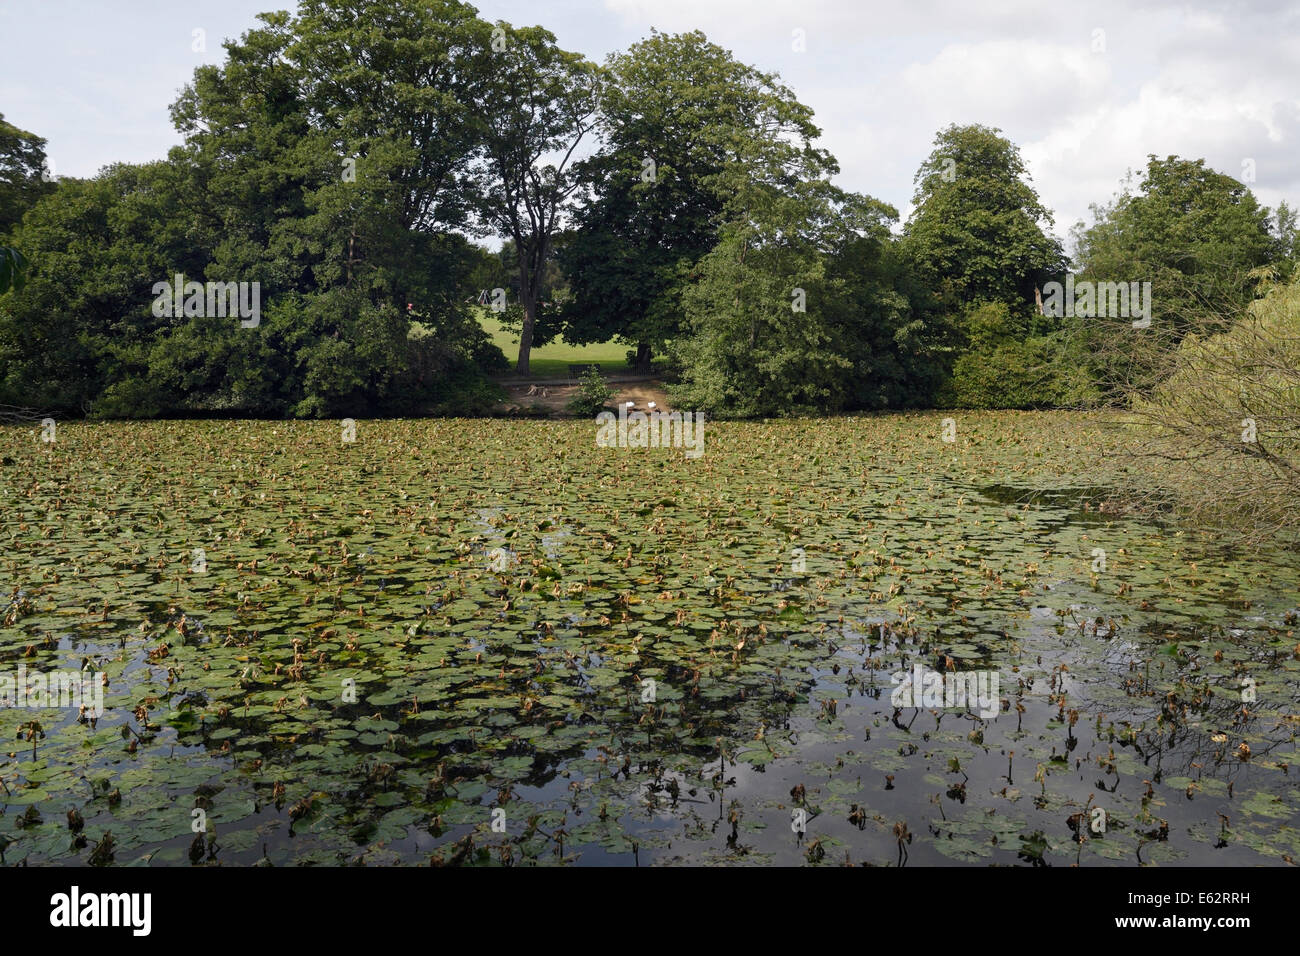 Graves Park Boating Lake in Norton, Sheffield, covered in lilies, Parkland pond Stock Photo